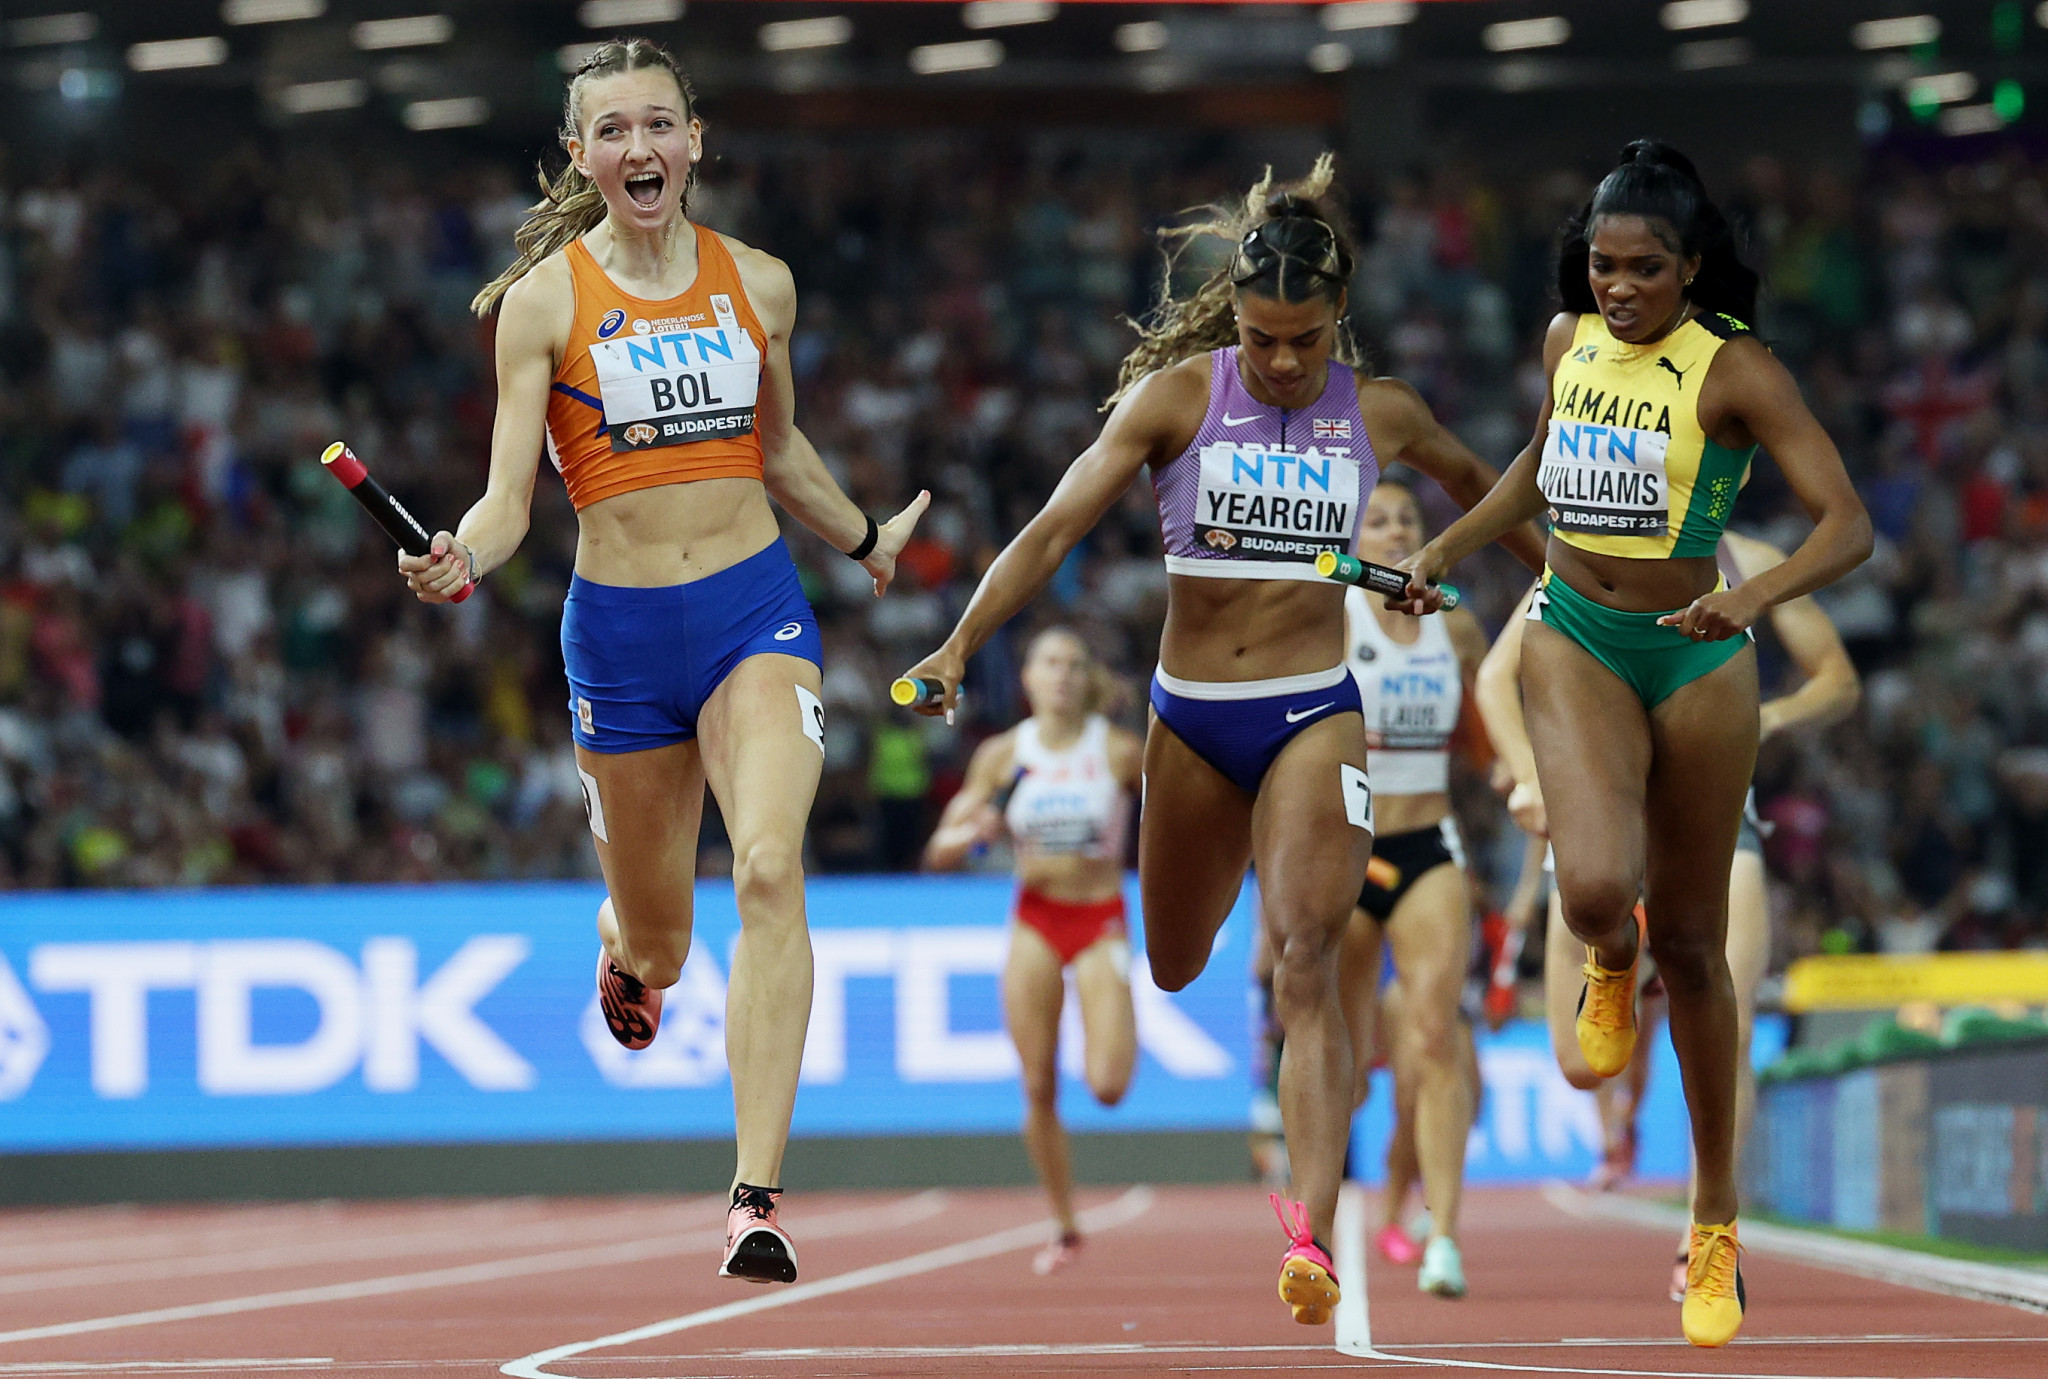 Femke Bol made up for her late slip in the mixed 4x400 metres relay as she snatched victory for the Netherlands in the closing strides of the women's 4x400 metres relay, the final event of the championships ©Getty Images